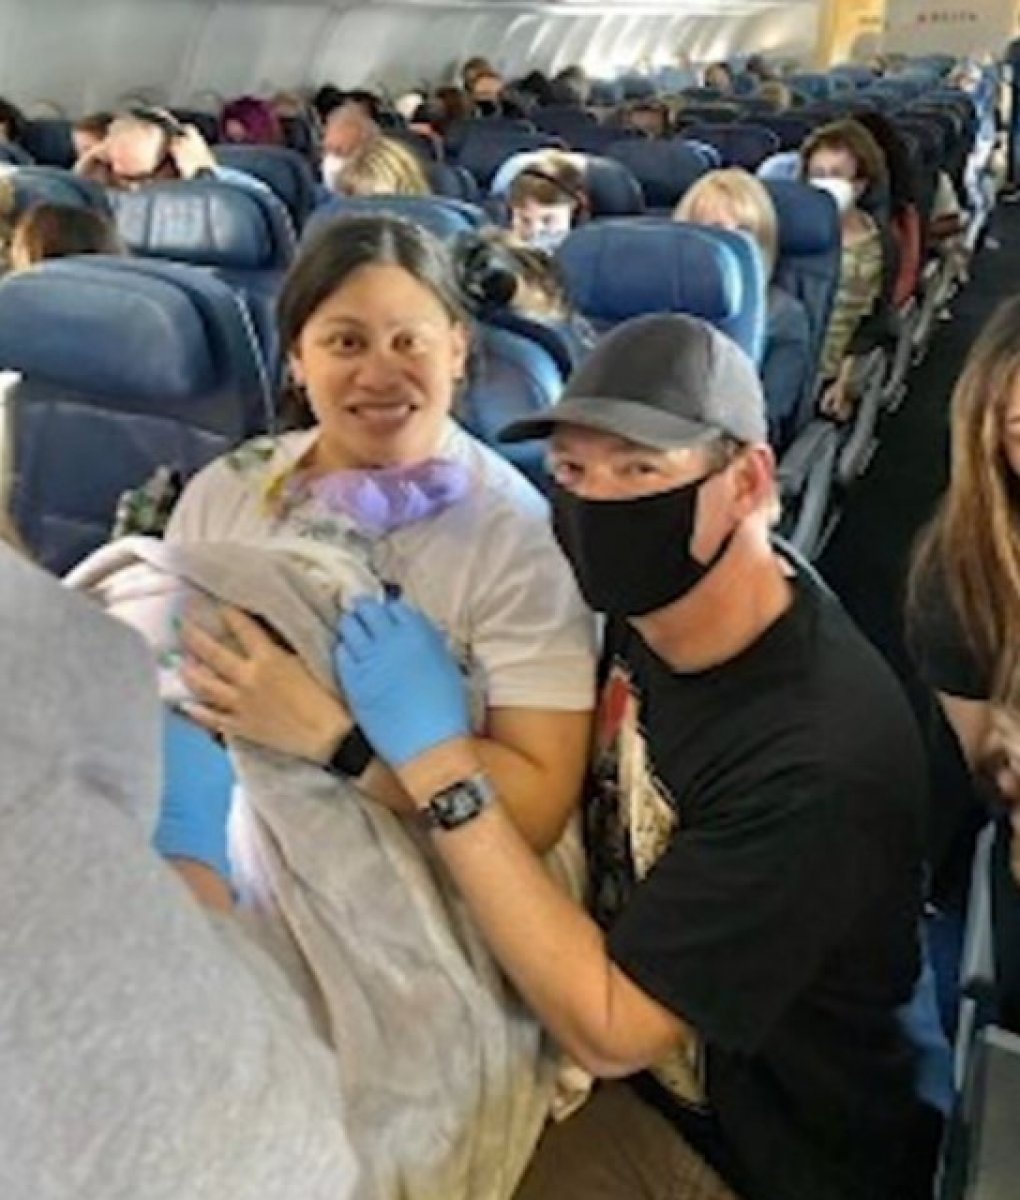 A woman gave birth on a plane in the USA #2